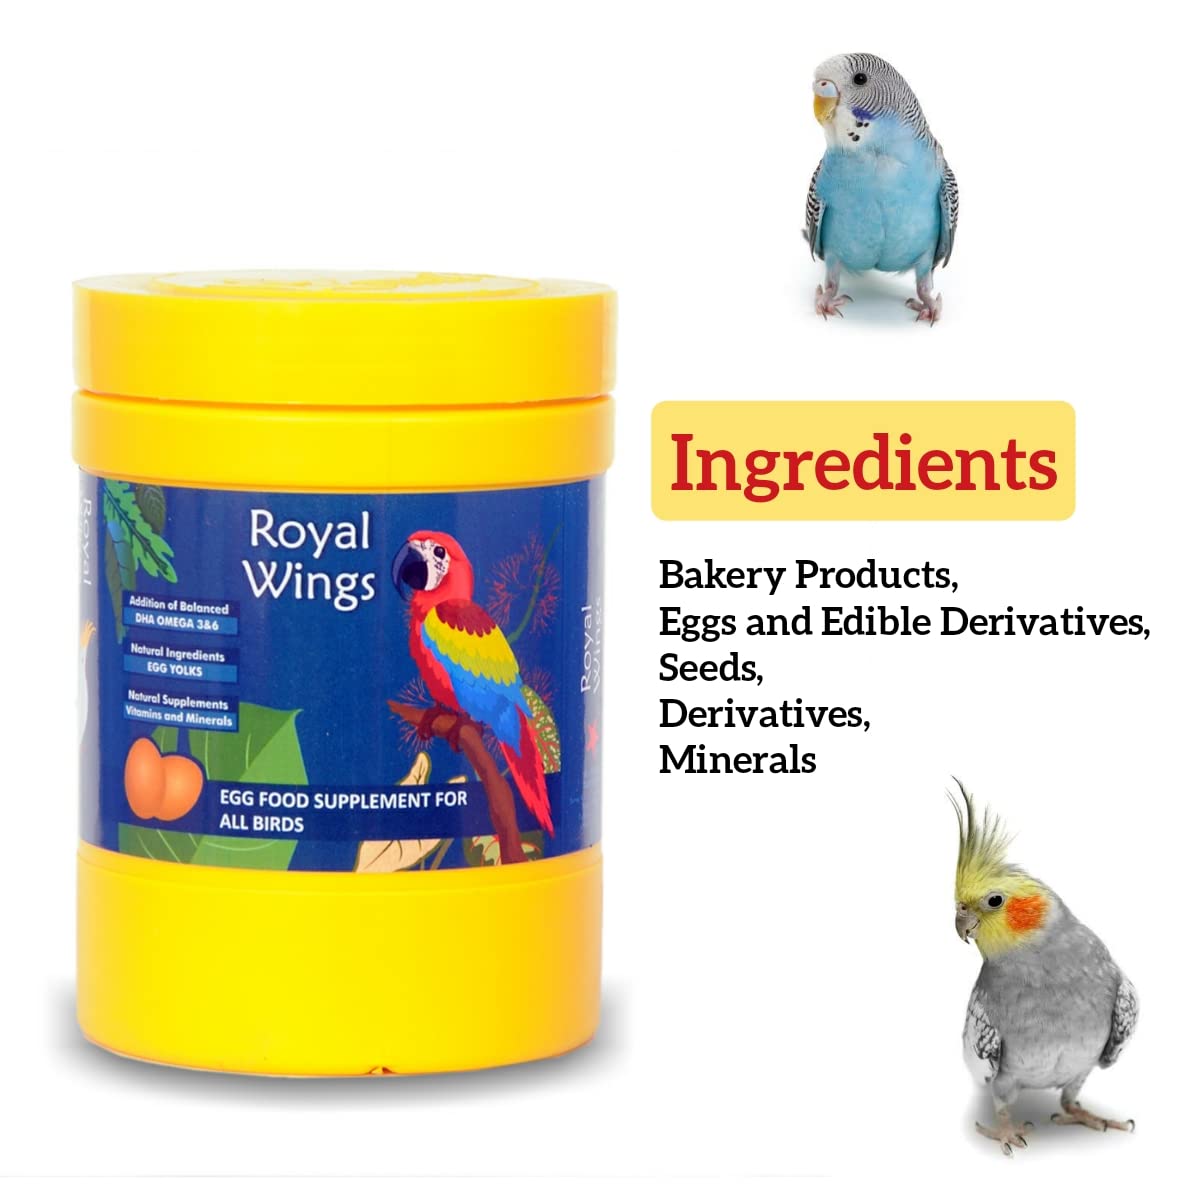 Star Farms Royal Wings Egg Food Supplement For All Birds, 250G